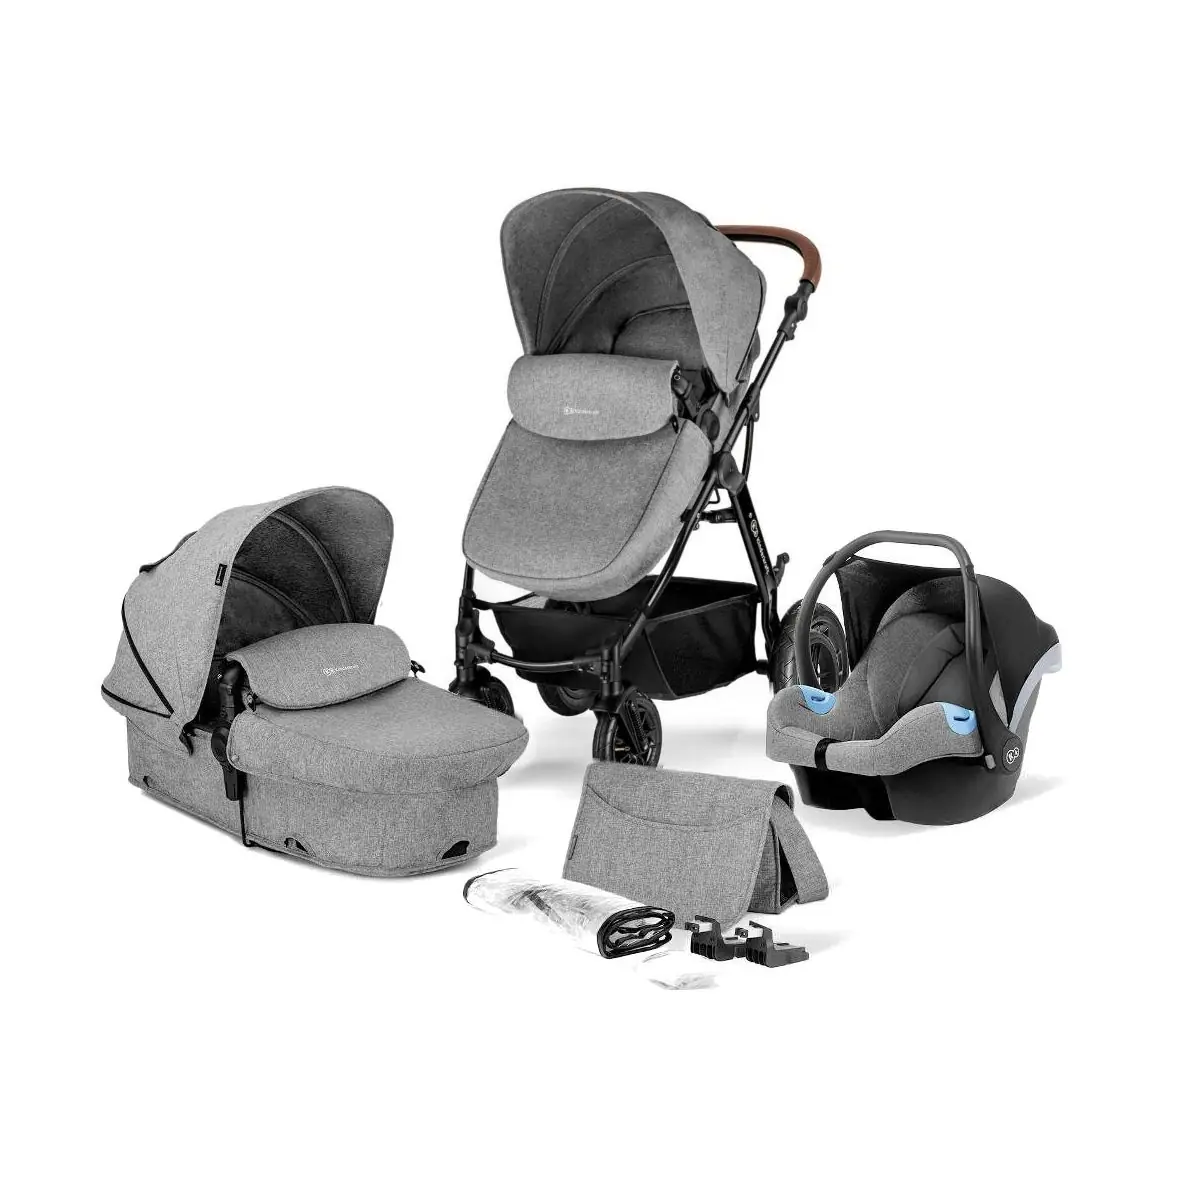 Kinderkraft Moov 3in1 (Mink Car Seat) Travel System With Carrycot